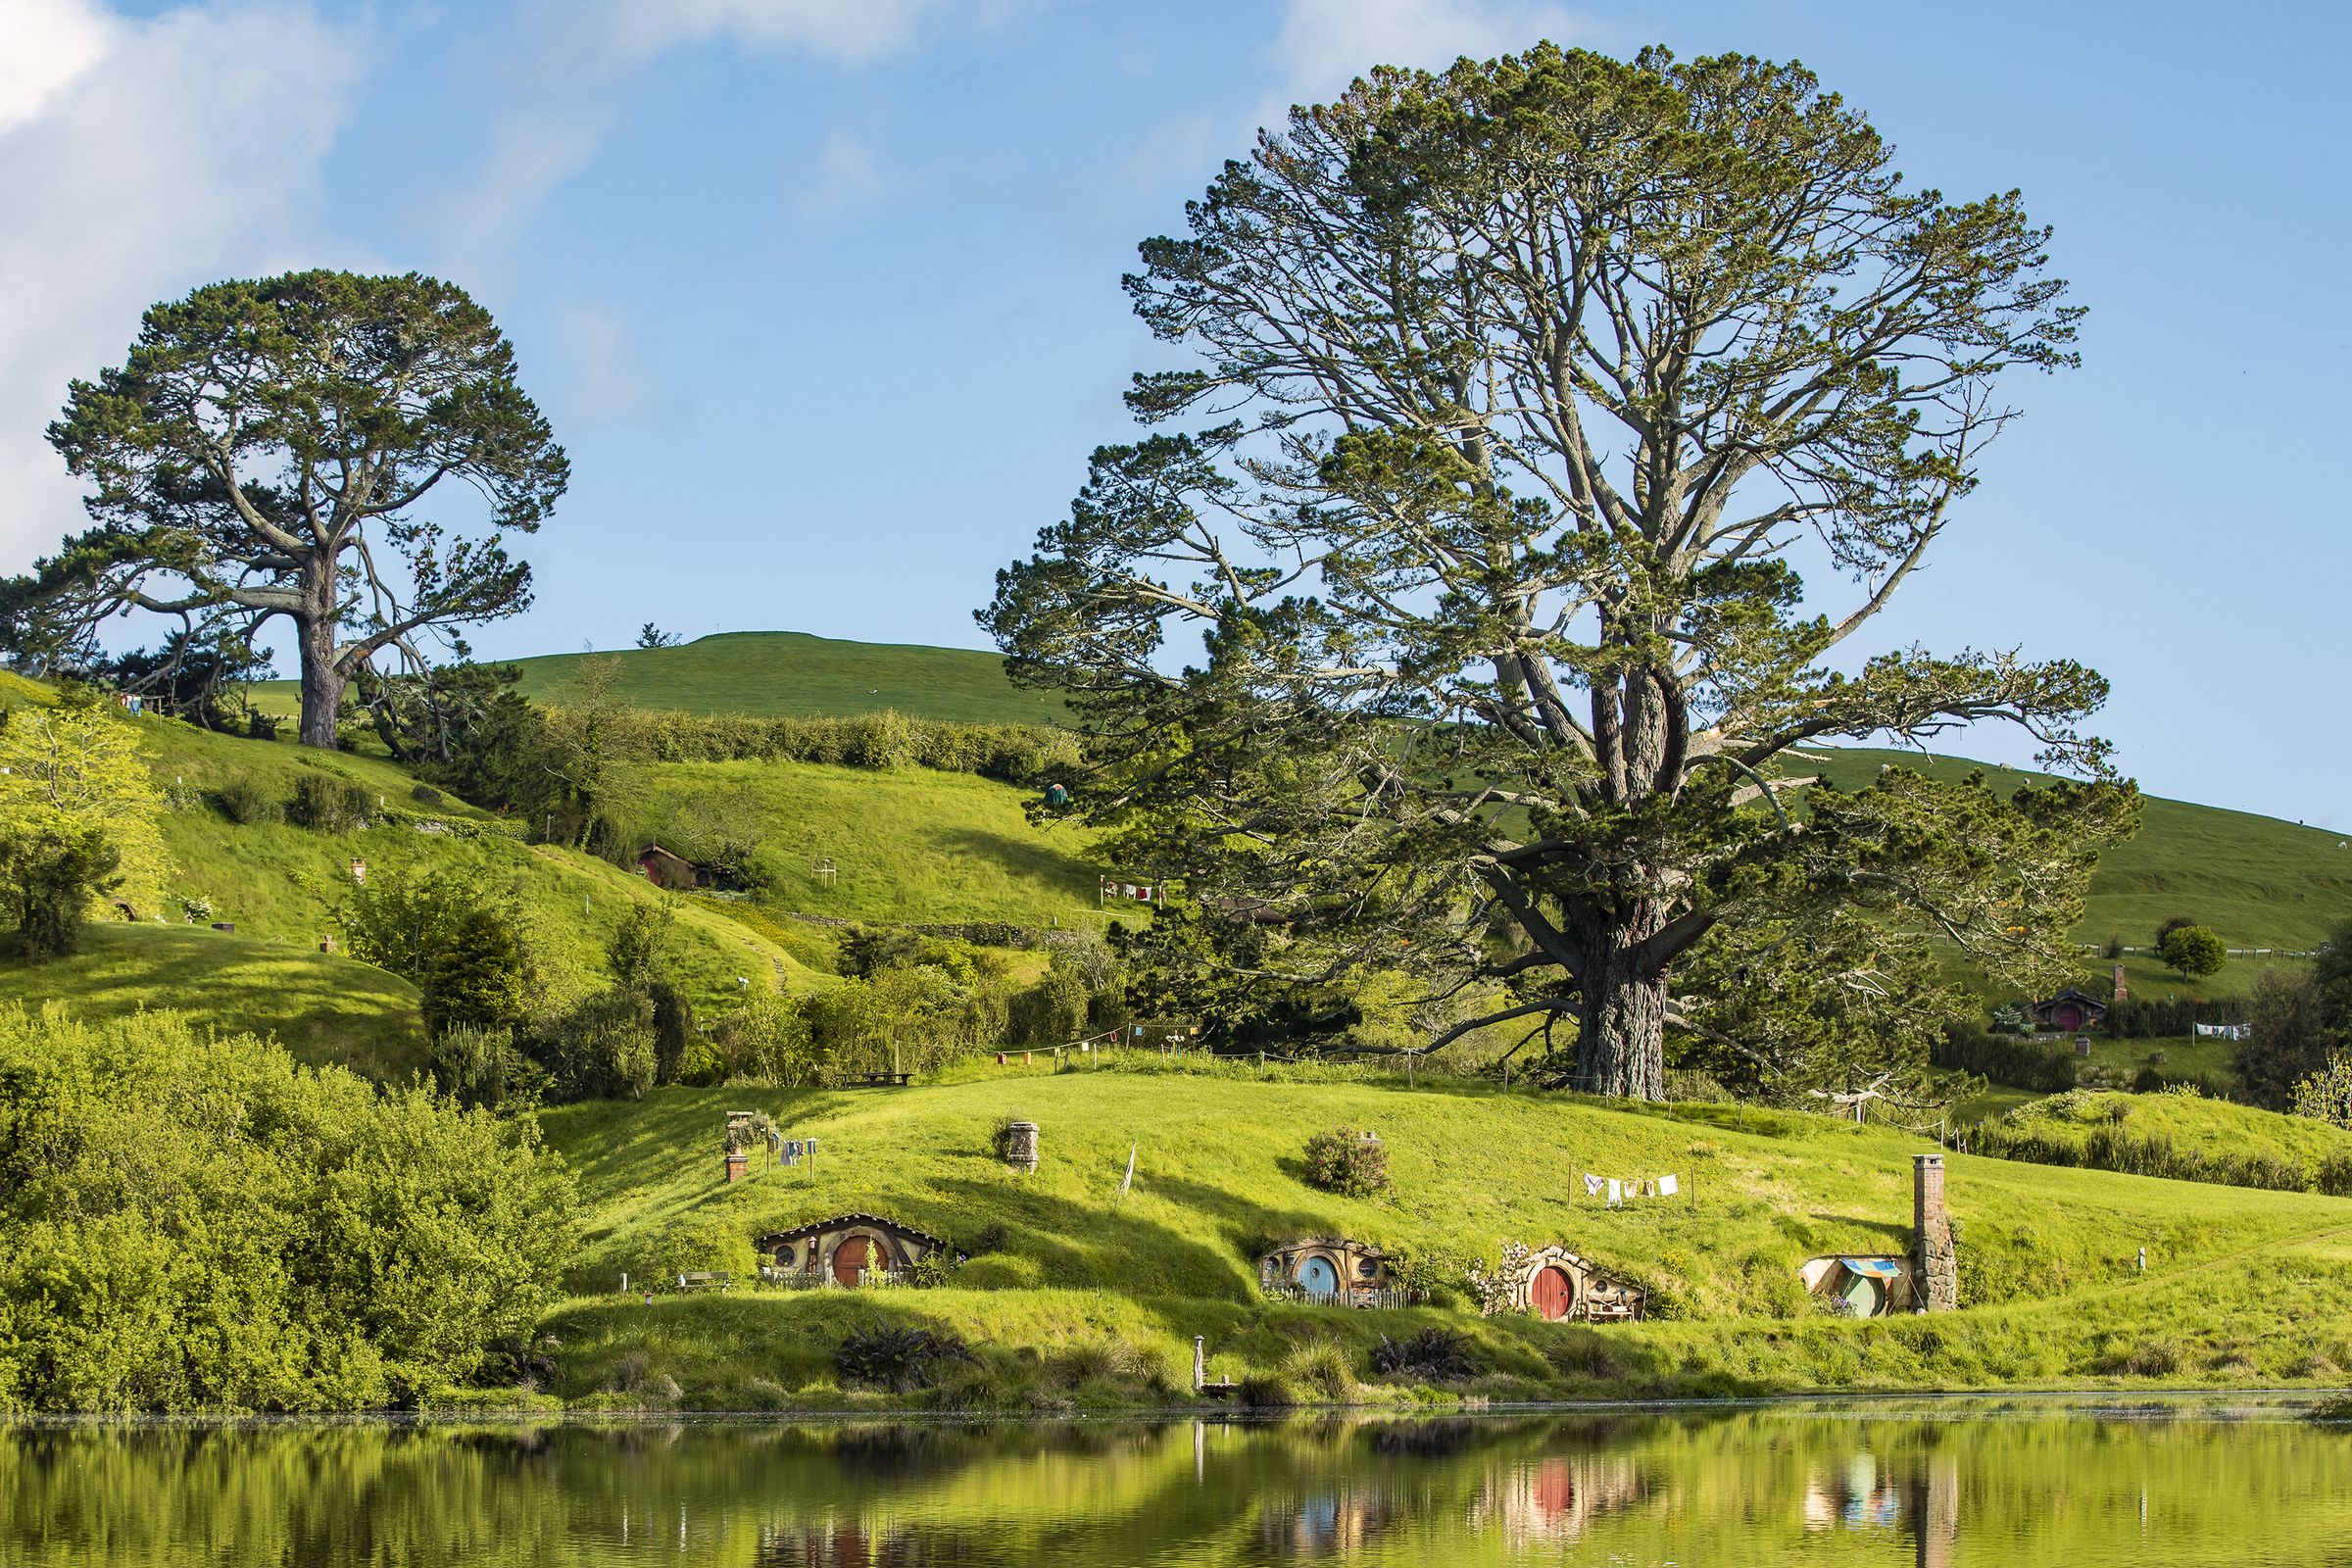 A photograph of the Hobbiton movie set, showing a Hobbit hole against rolling green hills.